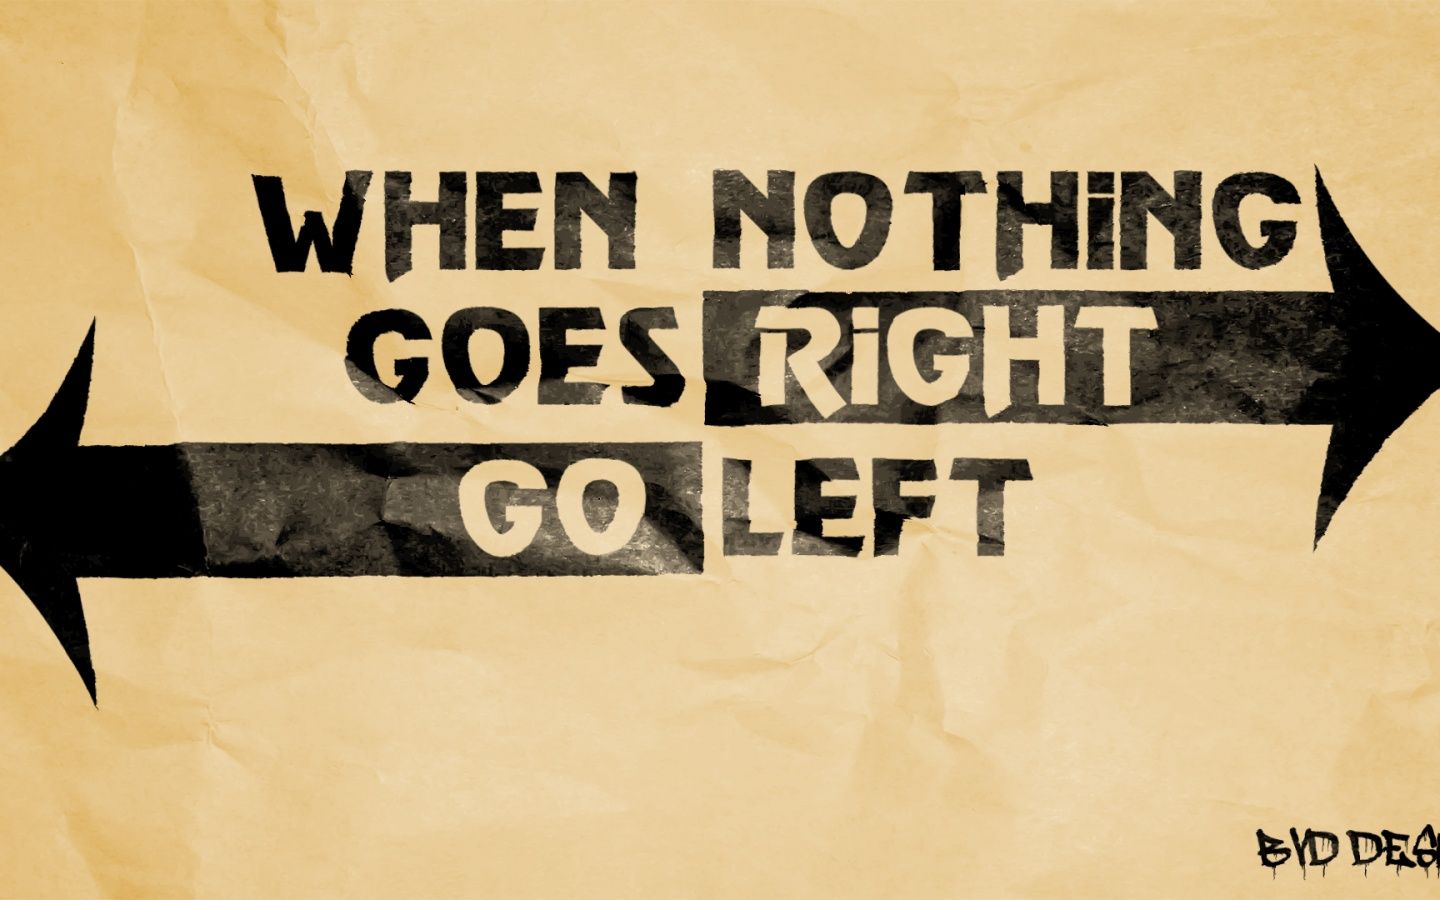 Life left to go. When nothing goes right go left. Go left. Go right. When nothing is going right Surf left.